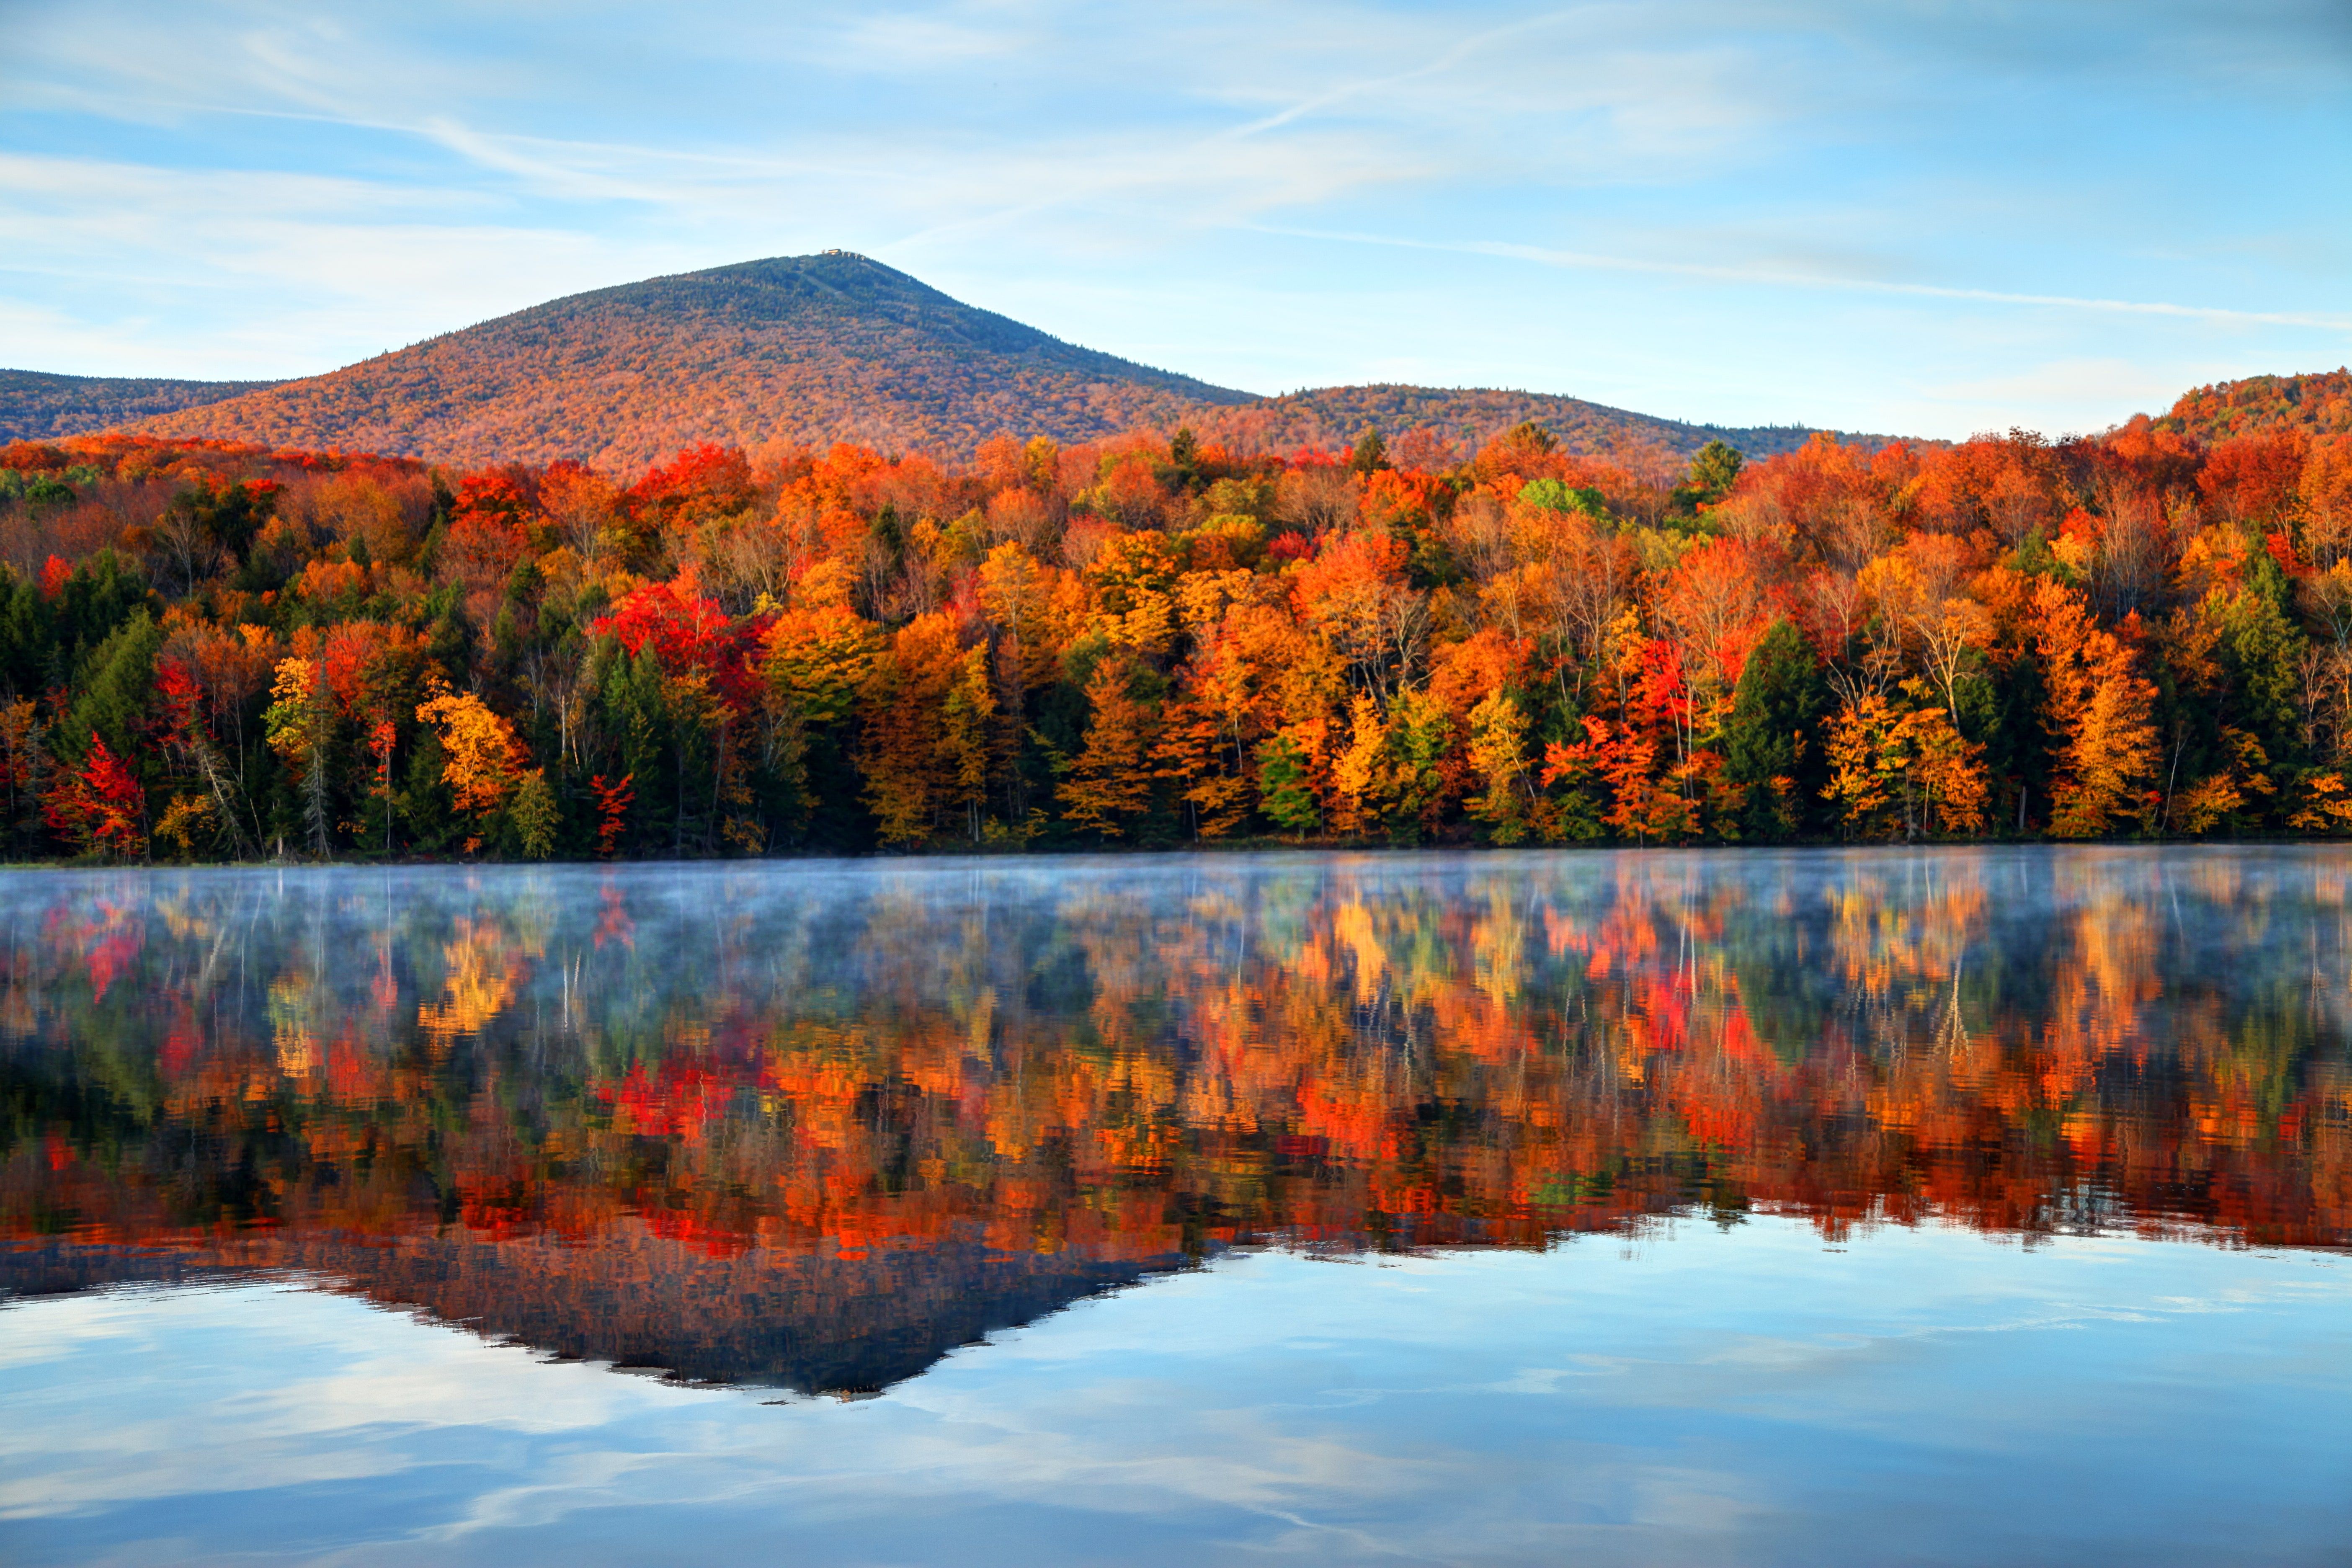 Where to See the Most Scenic New England Fall Foliage This Year. Condé Nast Traveler